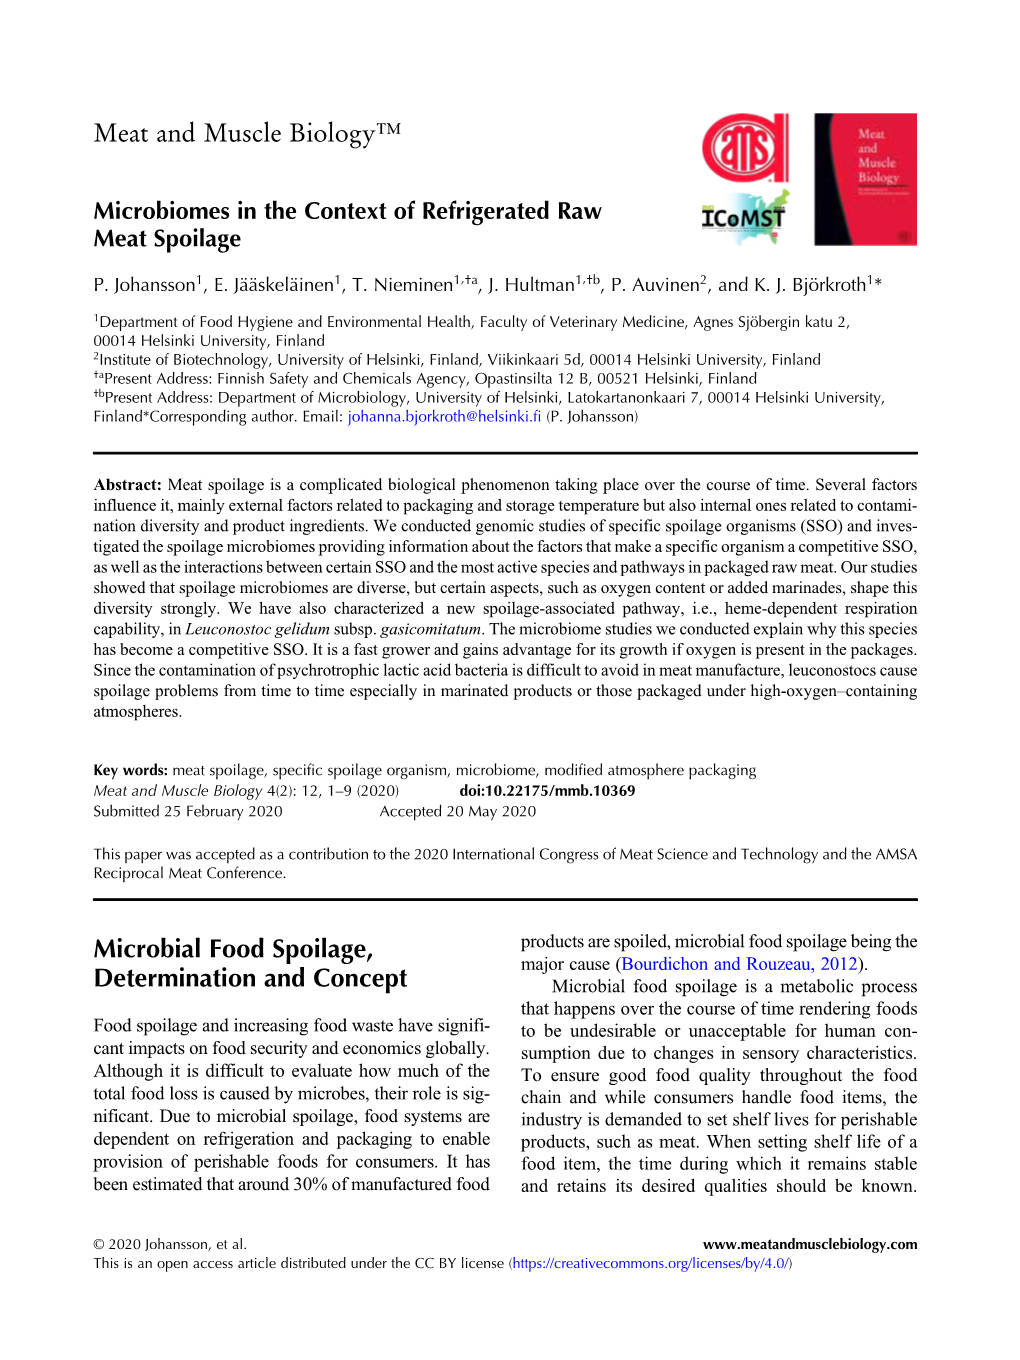 Microbiomes in the Context of Refrigerated Raw Meat Spoilage